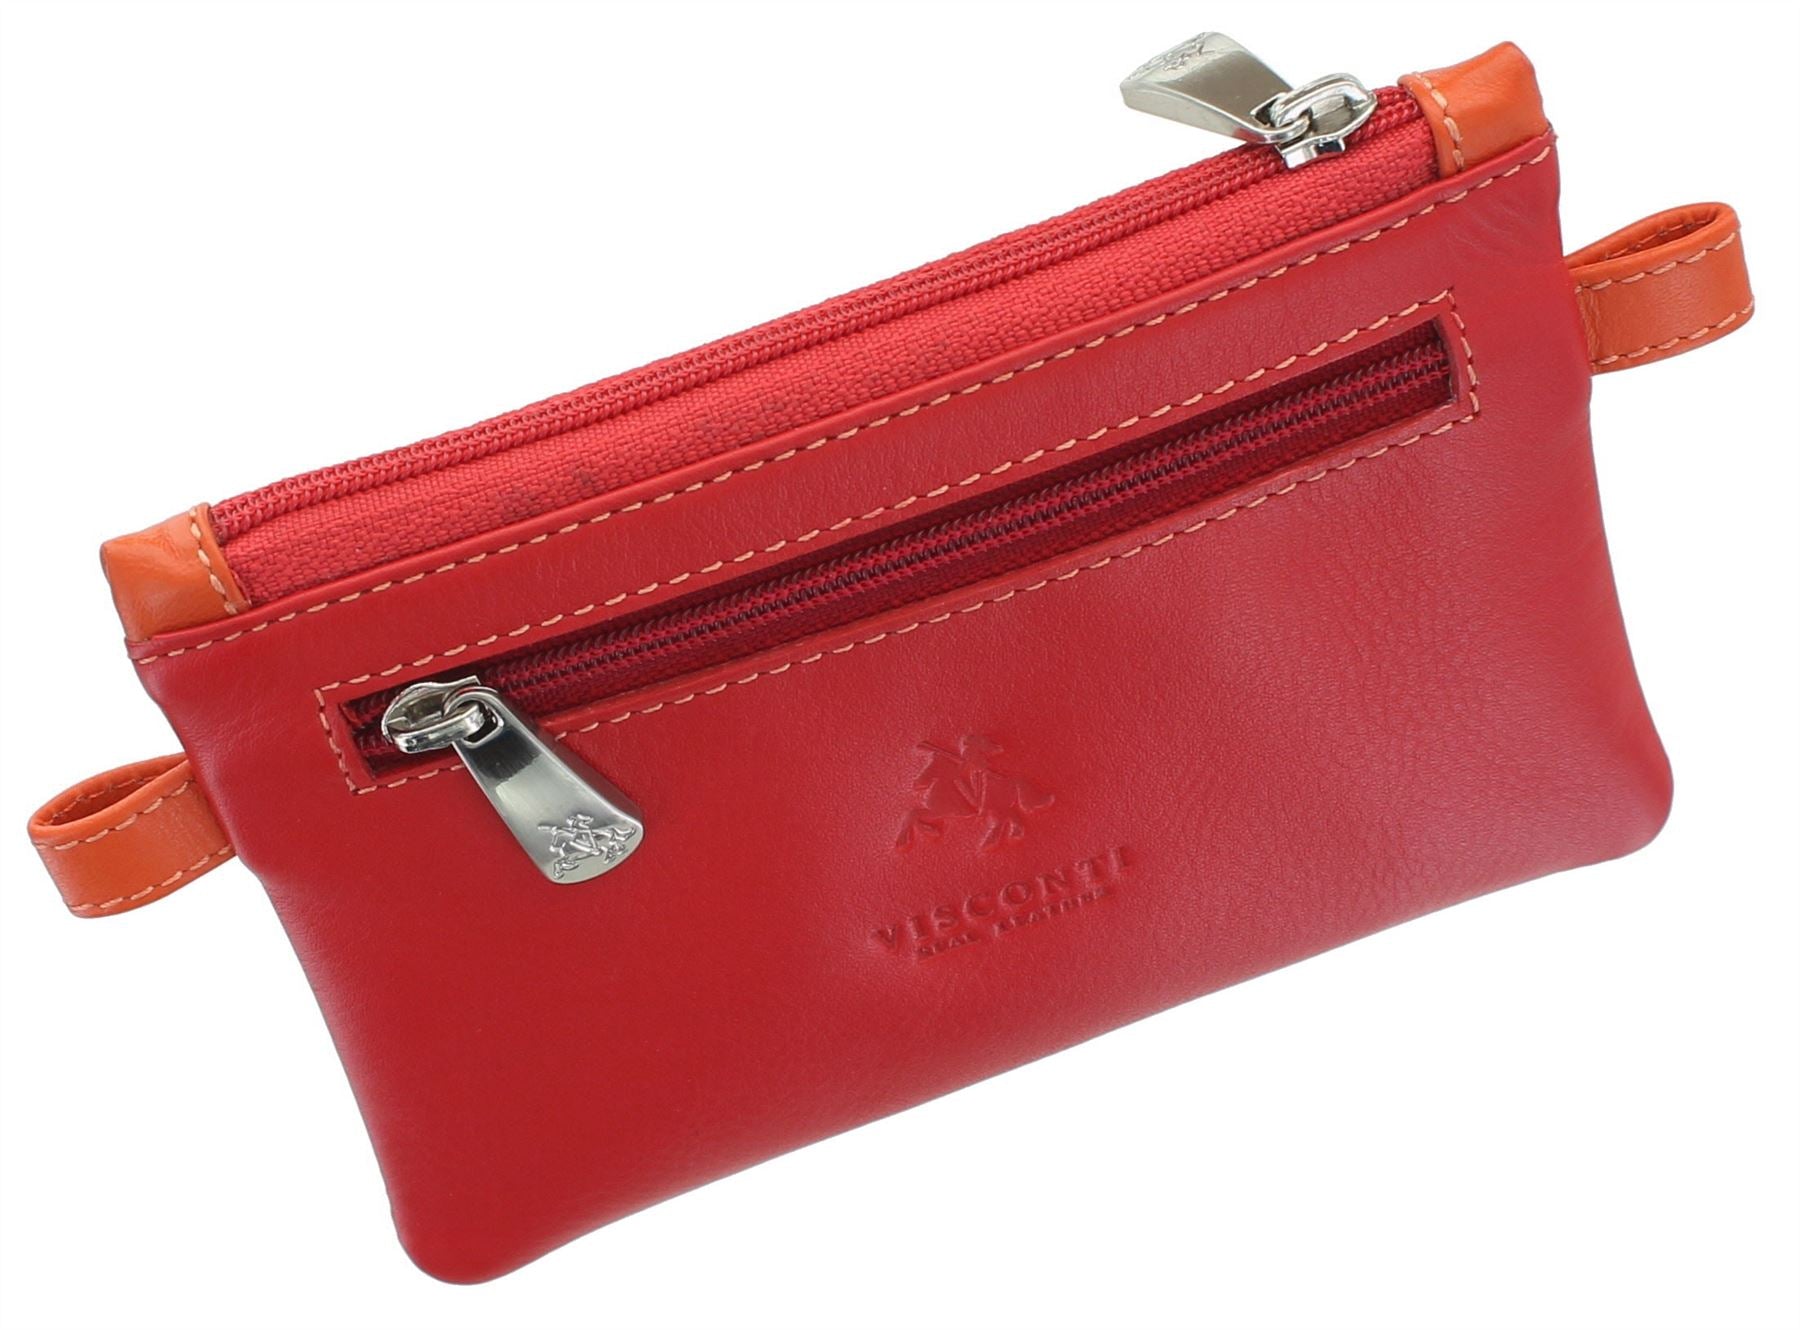 Visconti Red RFID Protection Soft Leather Purse SP30 : Amazon.co.uk: Fashion